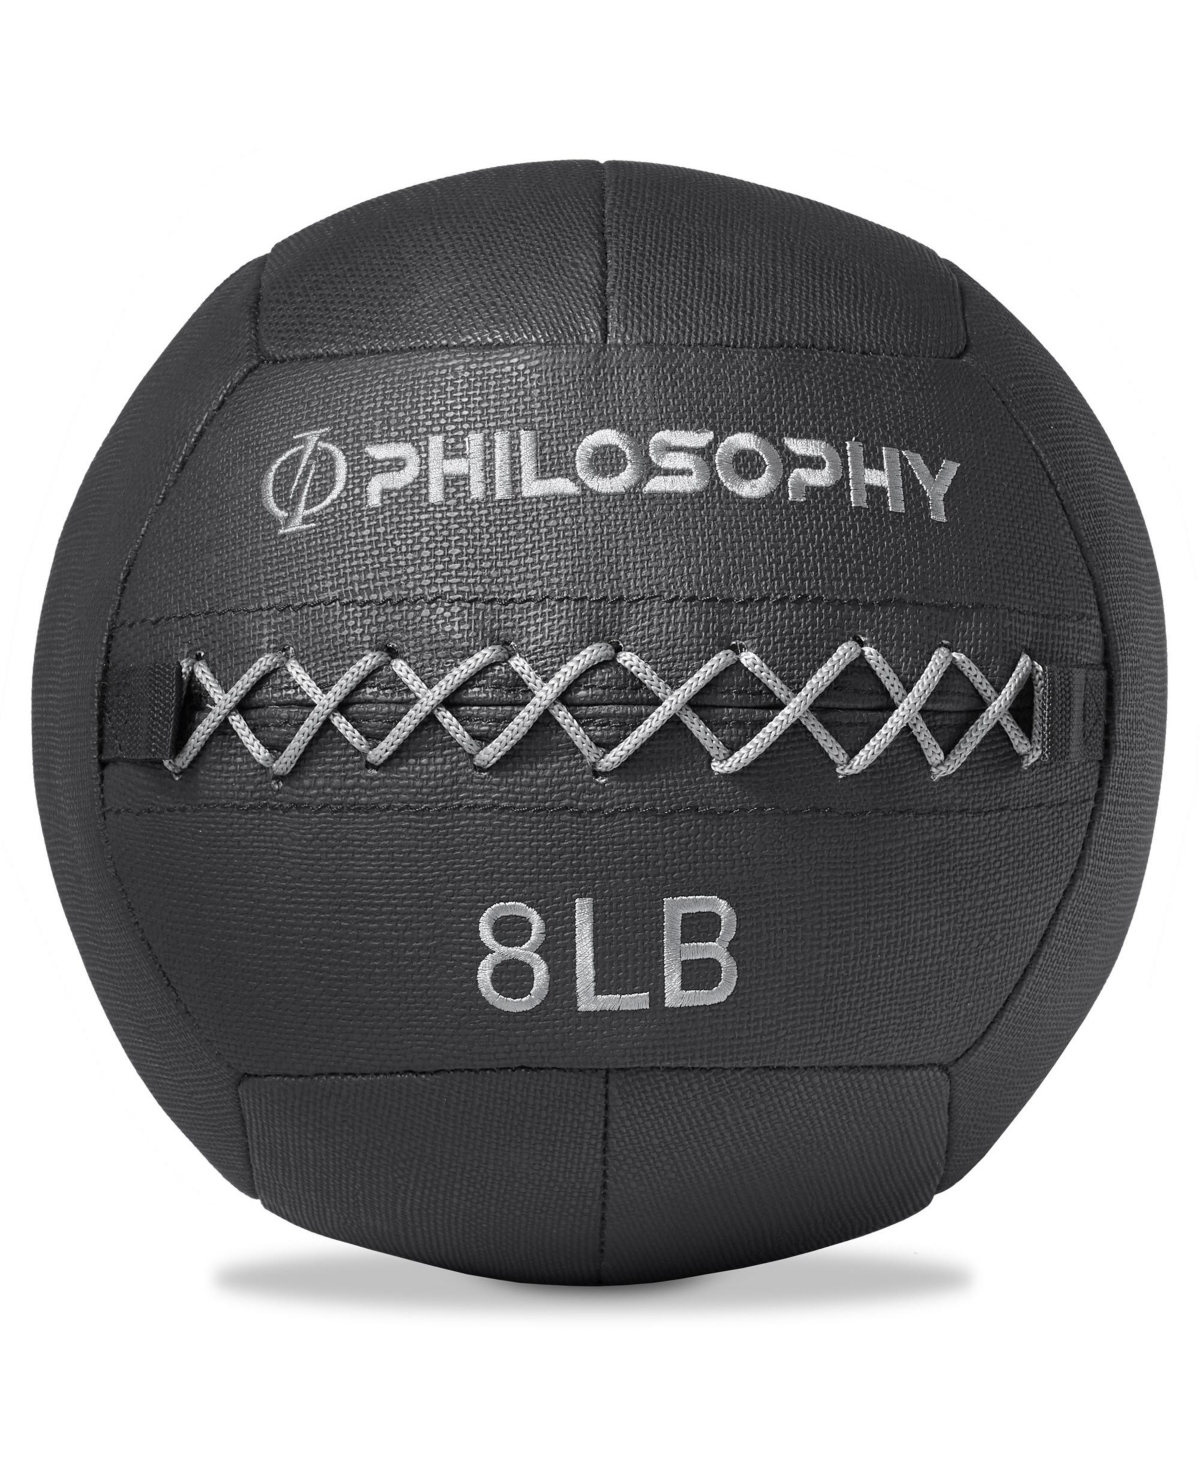 Wall Ball, 8 Lb - Soft Shell Weighted Medicine Ball with Non-Slip Grip - Black